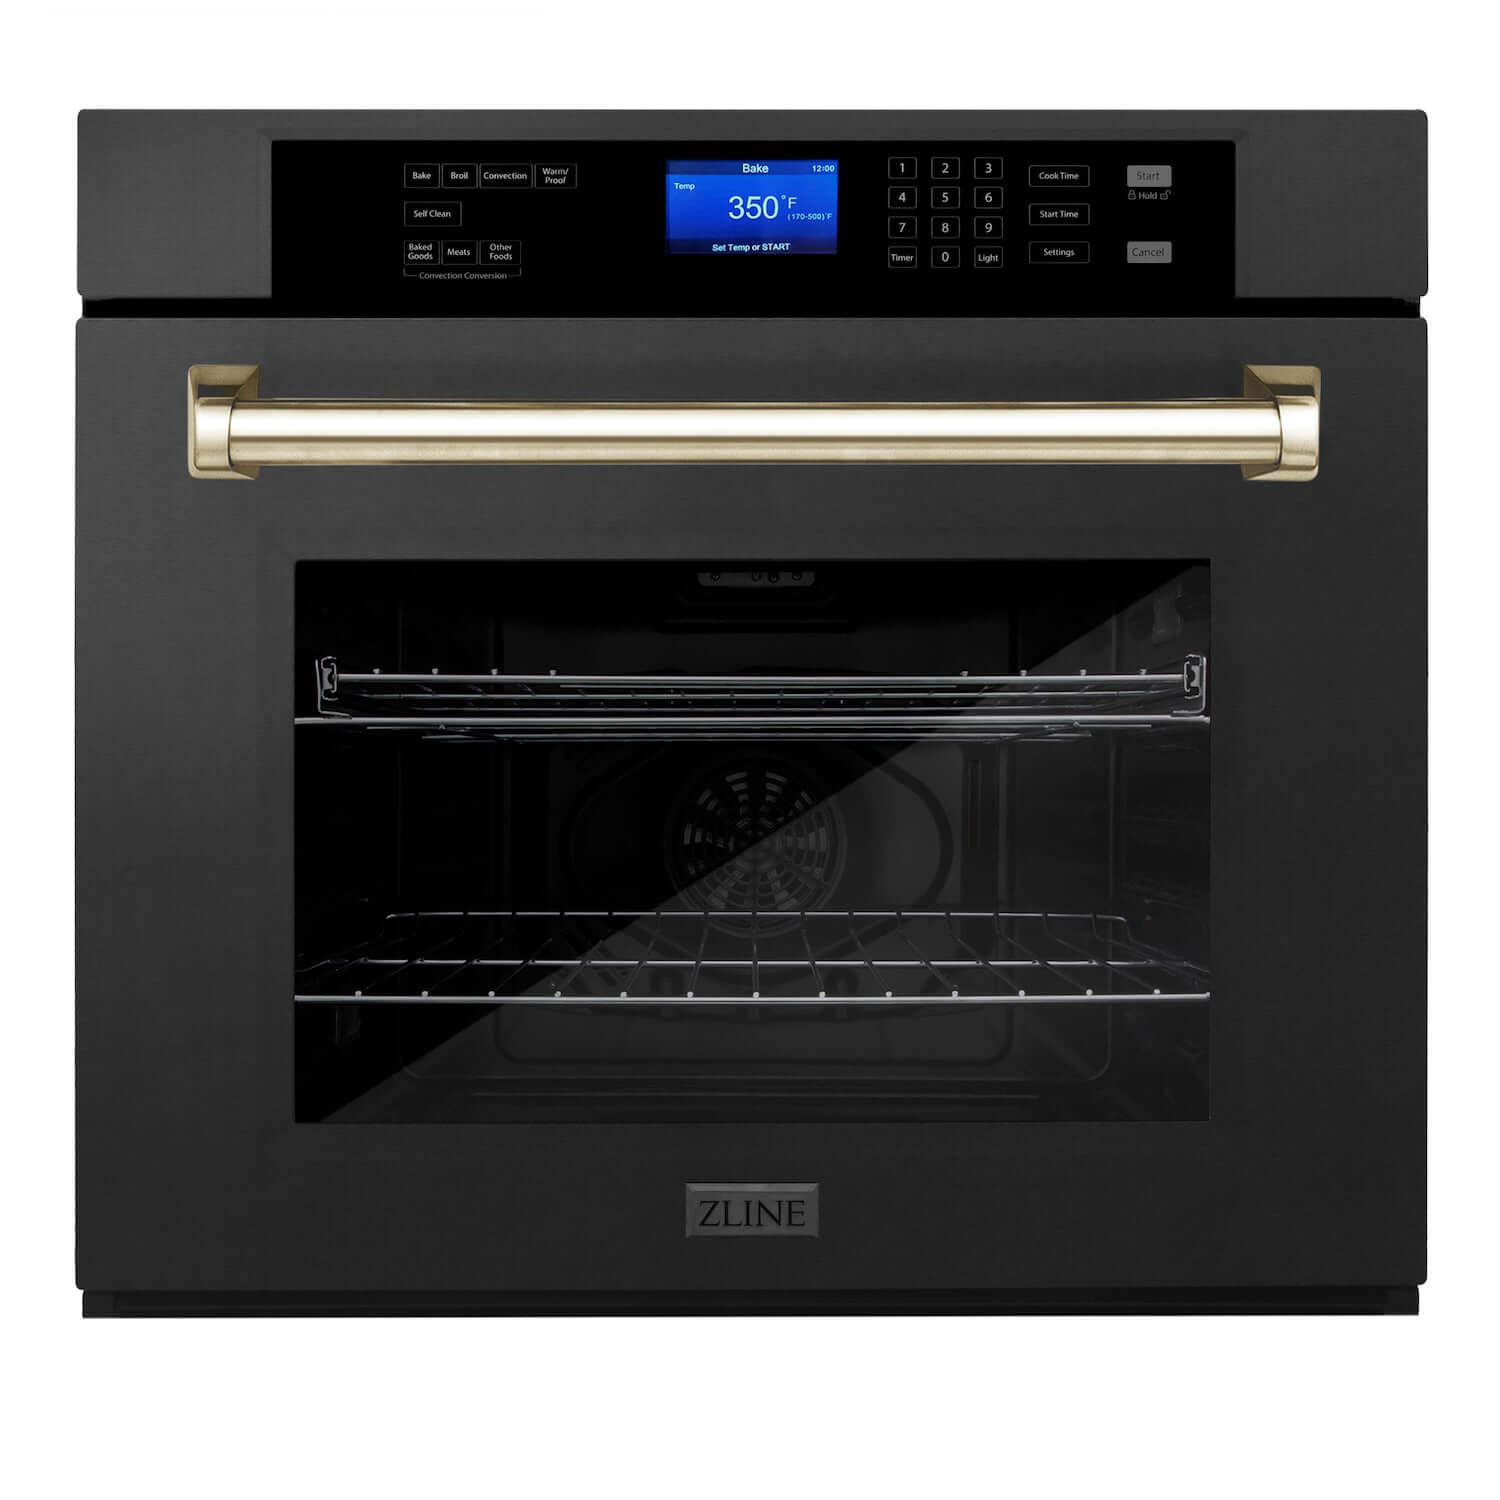 ZLINE Autograph Edition 30 in. Single Wall Oven with Self Clean and True Convection in Black Stainless Steel and Polished Gold Accents (AWSZ-30-BS-G)-Wall Ovens-AWSZ-30-BS-G ZLINE Kitchen and Bath